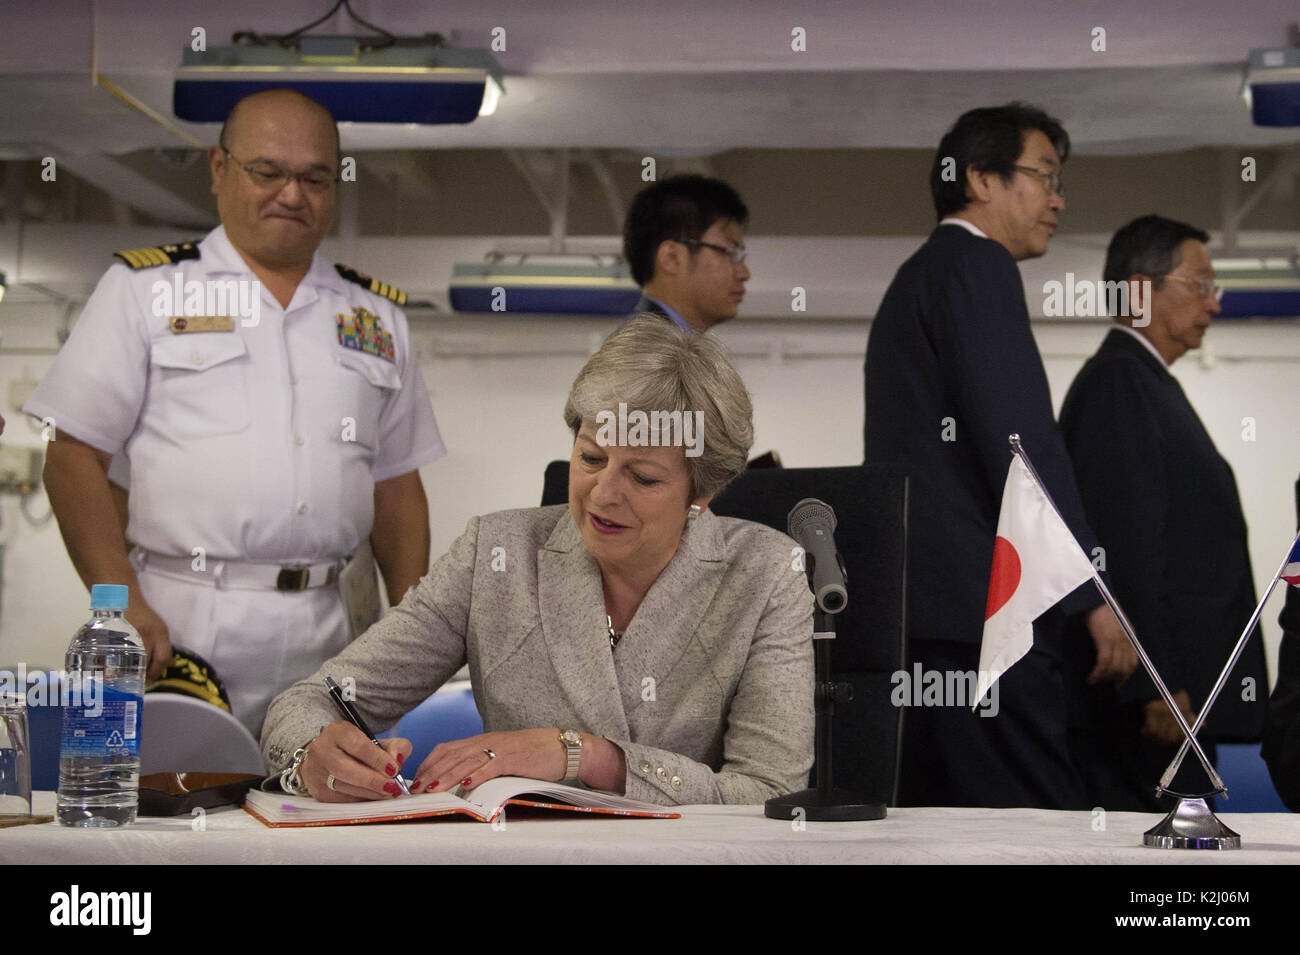 Prime Minister Theresa May signs a visitor's book after meeting crew and naval personnel including those from the British Royal Navy on board the Japanese aircraft carrier, J.S. Izumo at Yokosuka Naval Base near Tokyo. Stock Photo